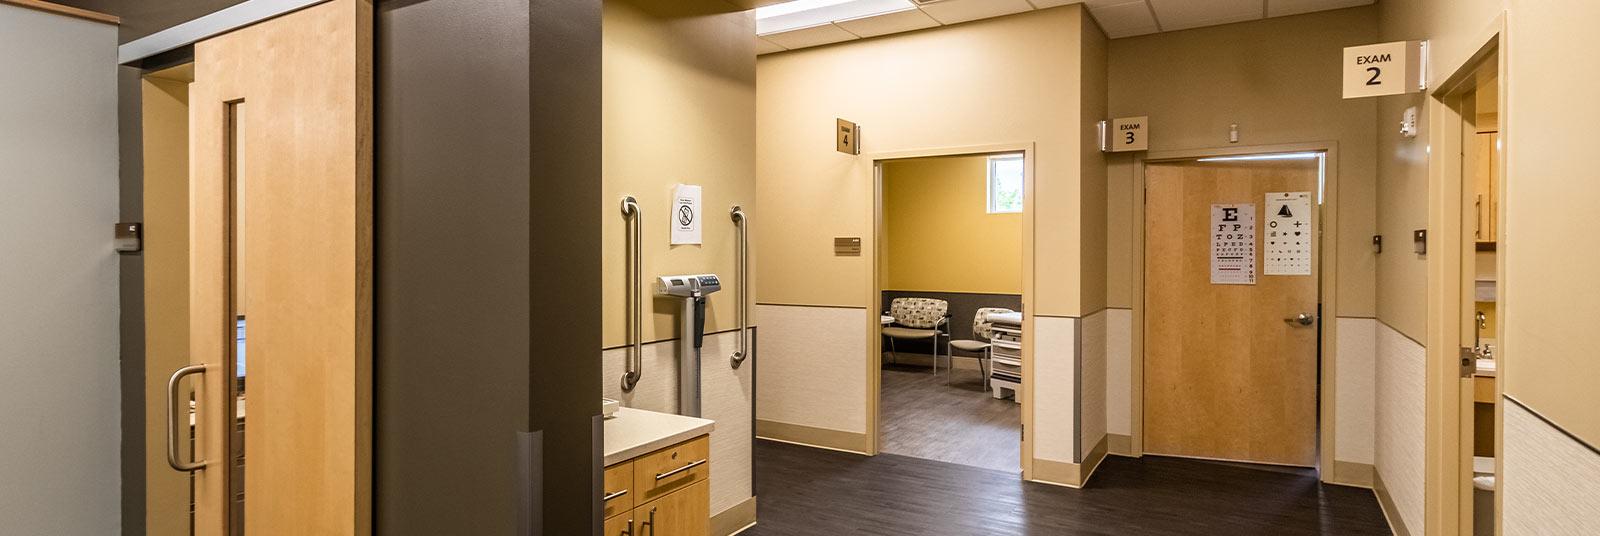 Exam rooms at the Premier Health Liberty Family Medicine office building in Liberty Township, Ohio.